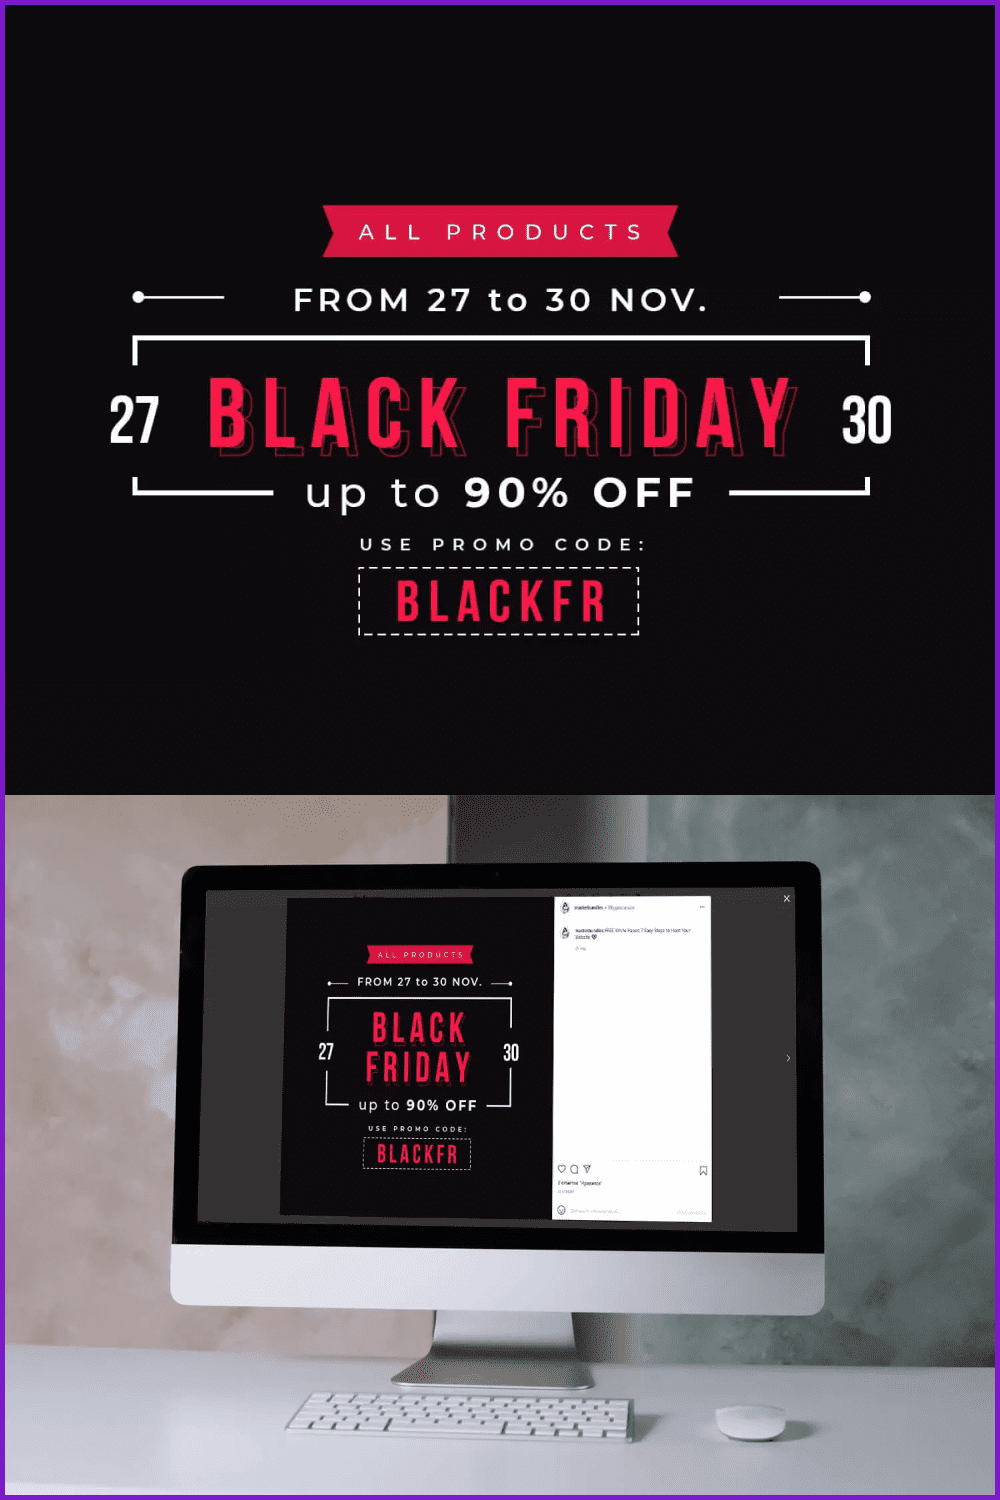 Poster with white and red text with black background for Black Friday.